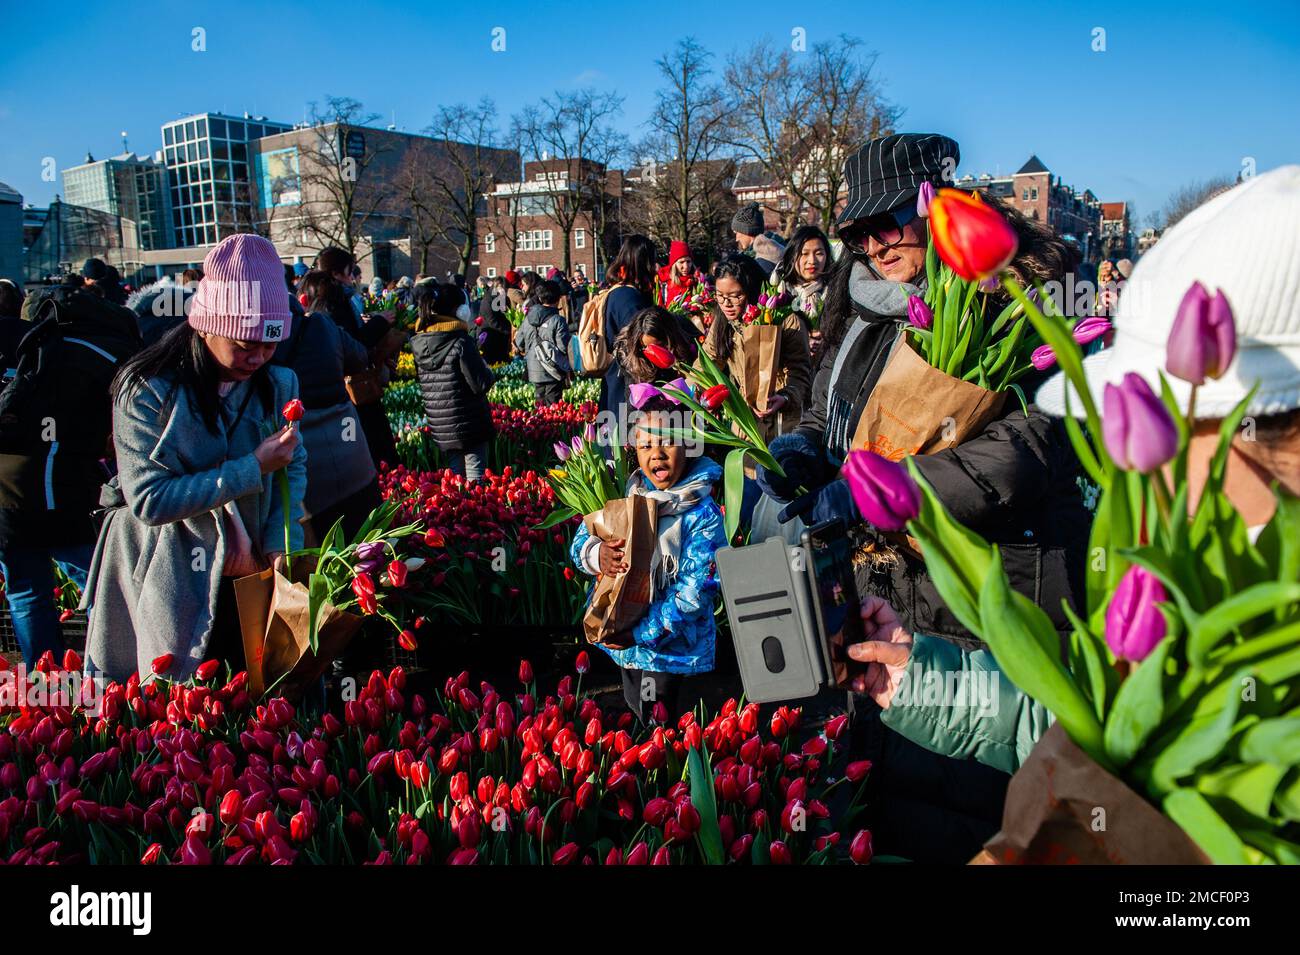 Families are seen choosing tulips for free. Each year on the 3rd Saturday of January, the National Tulip Day is celebrated in Amsterdam. Dutch tulip growers built a huge picking garden with more than 200,000 colorful tulips at the Museumplein in Amsterdam. Visitors are allowed to pick tulips for free. The event was opened by Olympic skating champion, Irene Schouten. Prior to the opening, she christened a new tulip: Tulipa 'Dutch Pearl' as a reference to the world - famous painting 'The girl with a pearl earring' by Johannes Vermeer. (Photo by Ana Fernandez/SOPA Images/Sipa USA) Stock Photo